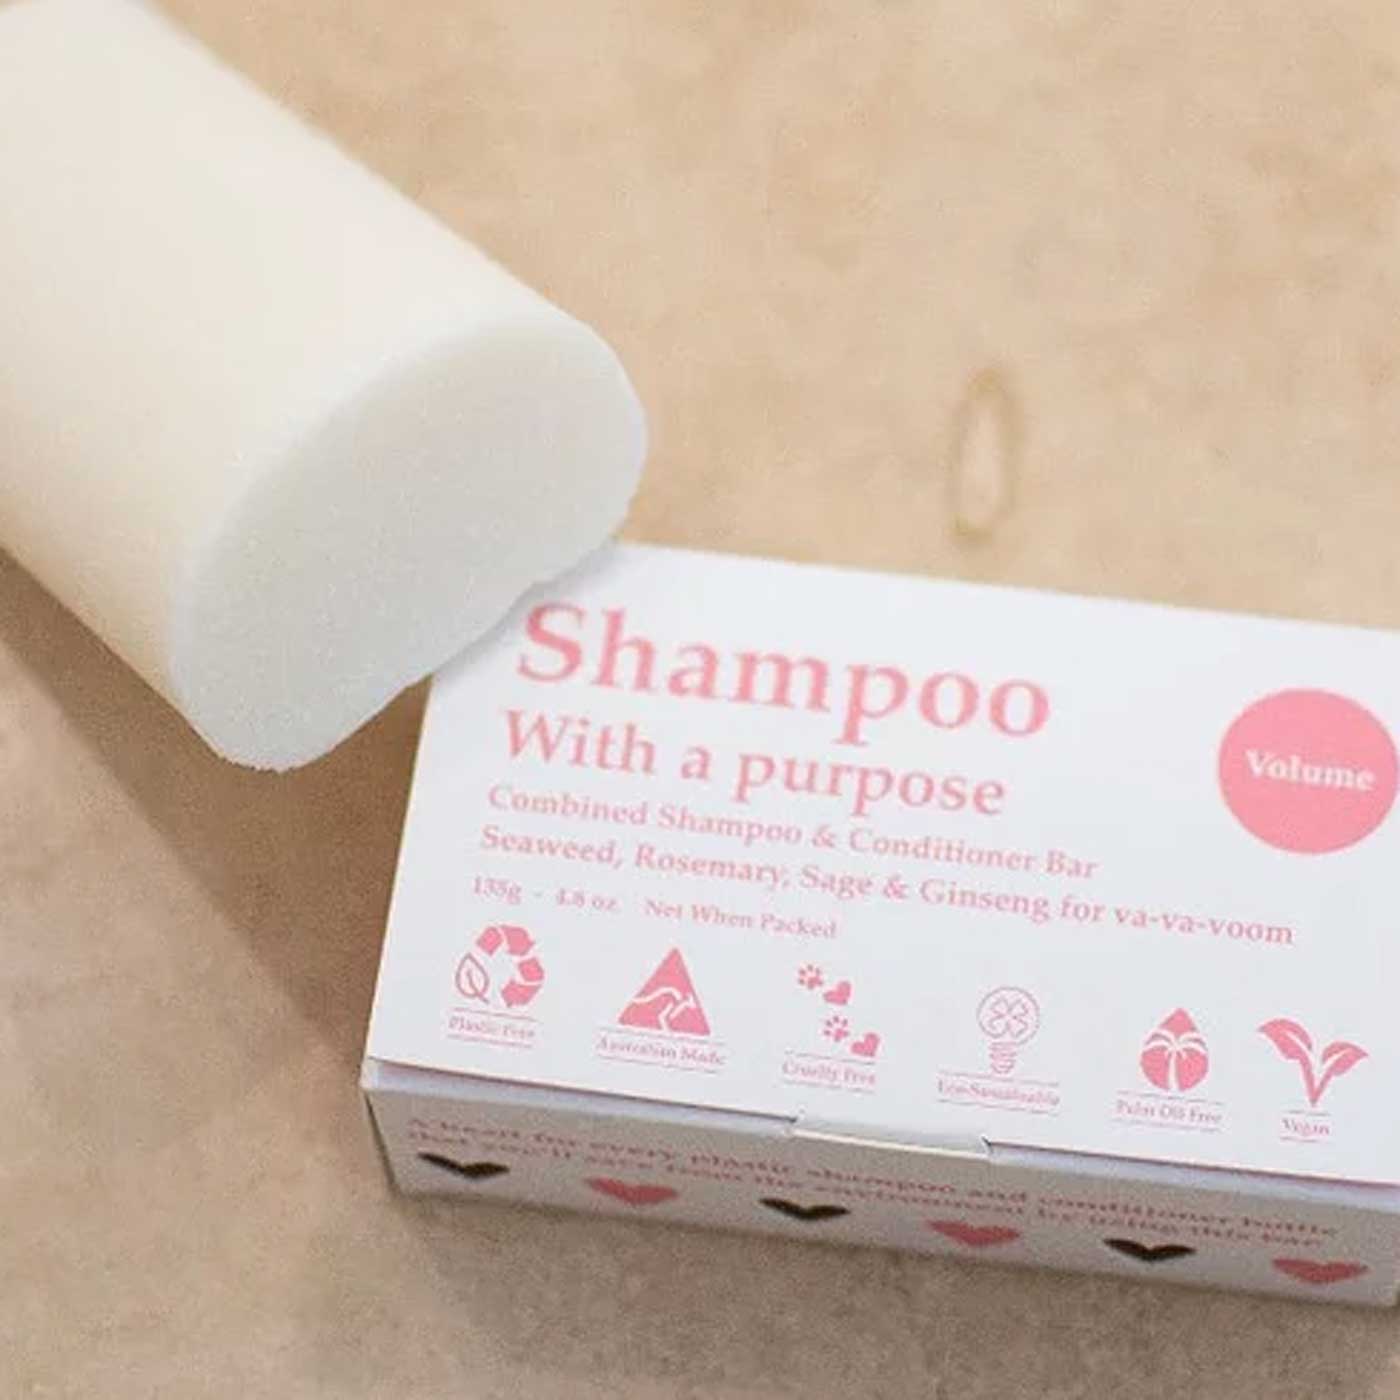 shampoo with a purpose vegan and shampoo and conditioner bar for volume. Adelaide plastic-free shop.